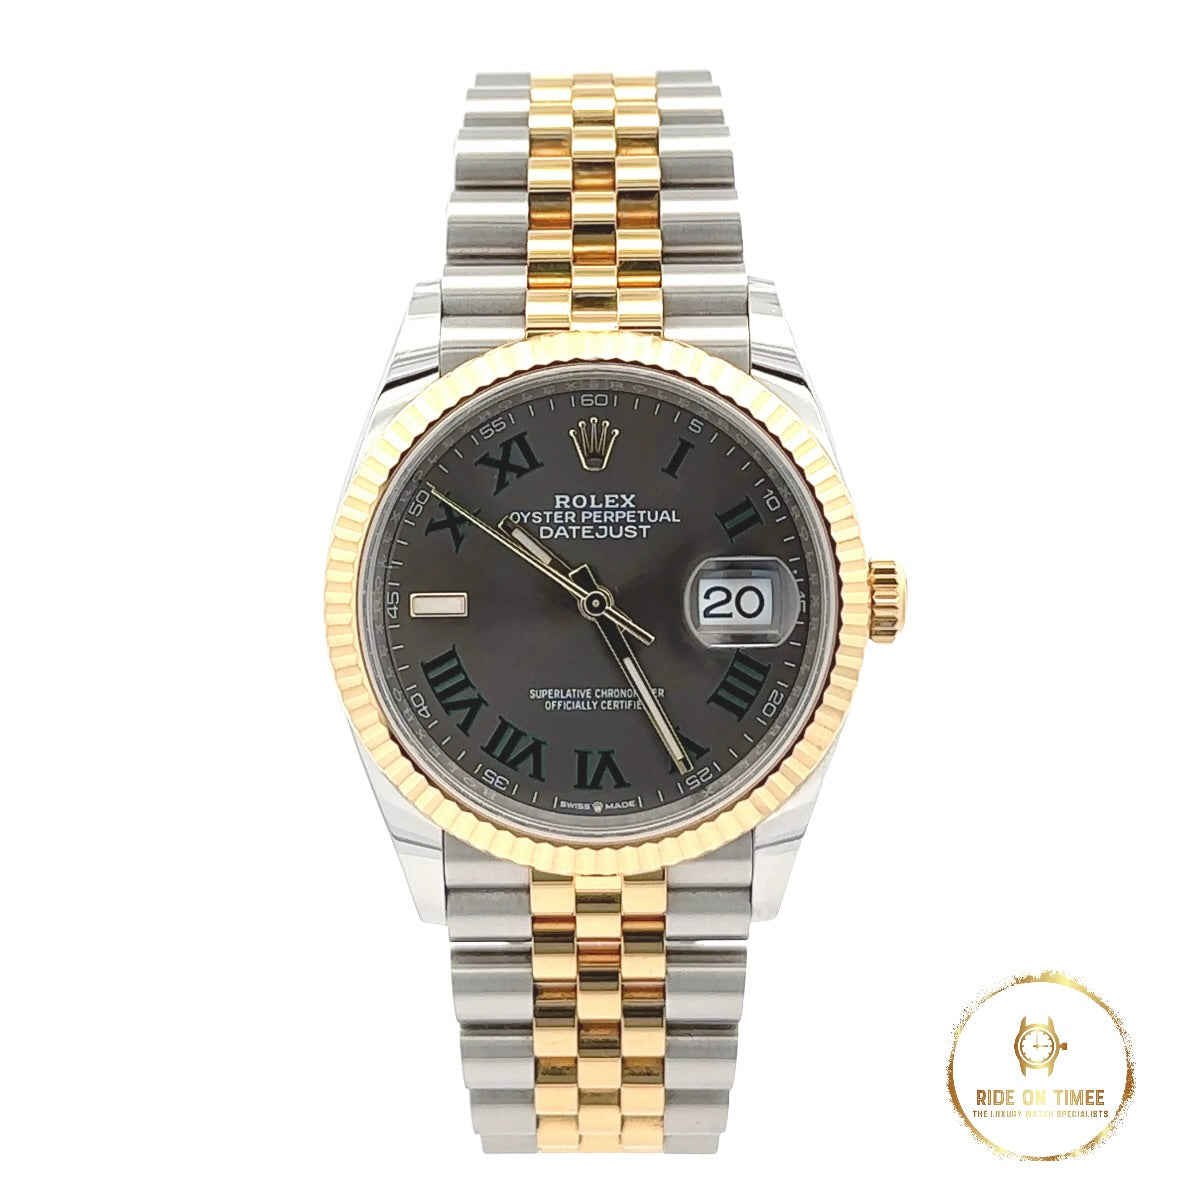 Rolex Datejust 36 Factory Wimbledon Dial ‘126233’ - Ride On Timee